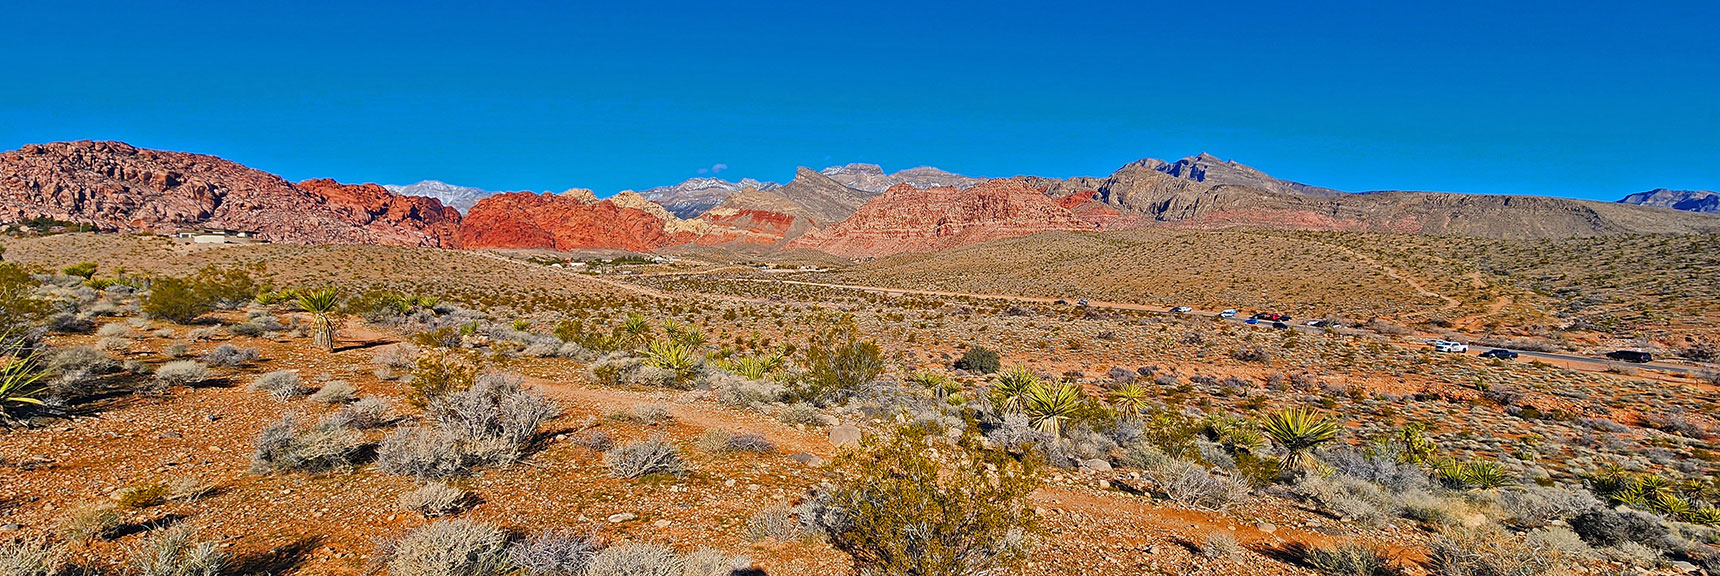 View from Freeway Trail Ridge Back to Gene's Trailhead and Calico Basin | Calico Basin Daily Workout Trails | Calico Basin, Nevada